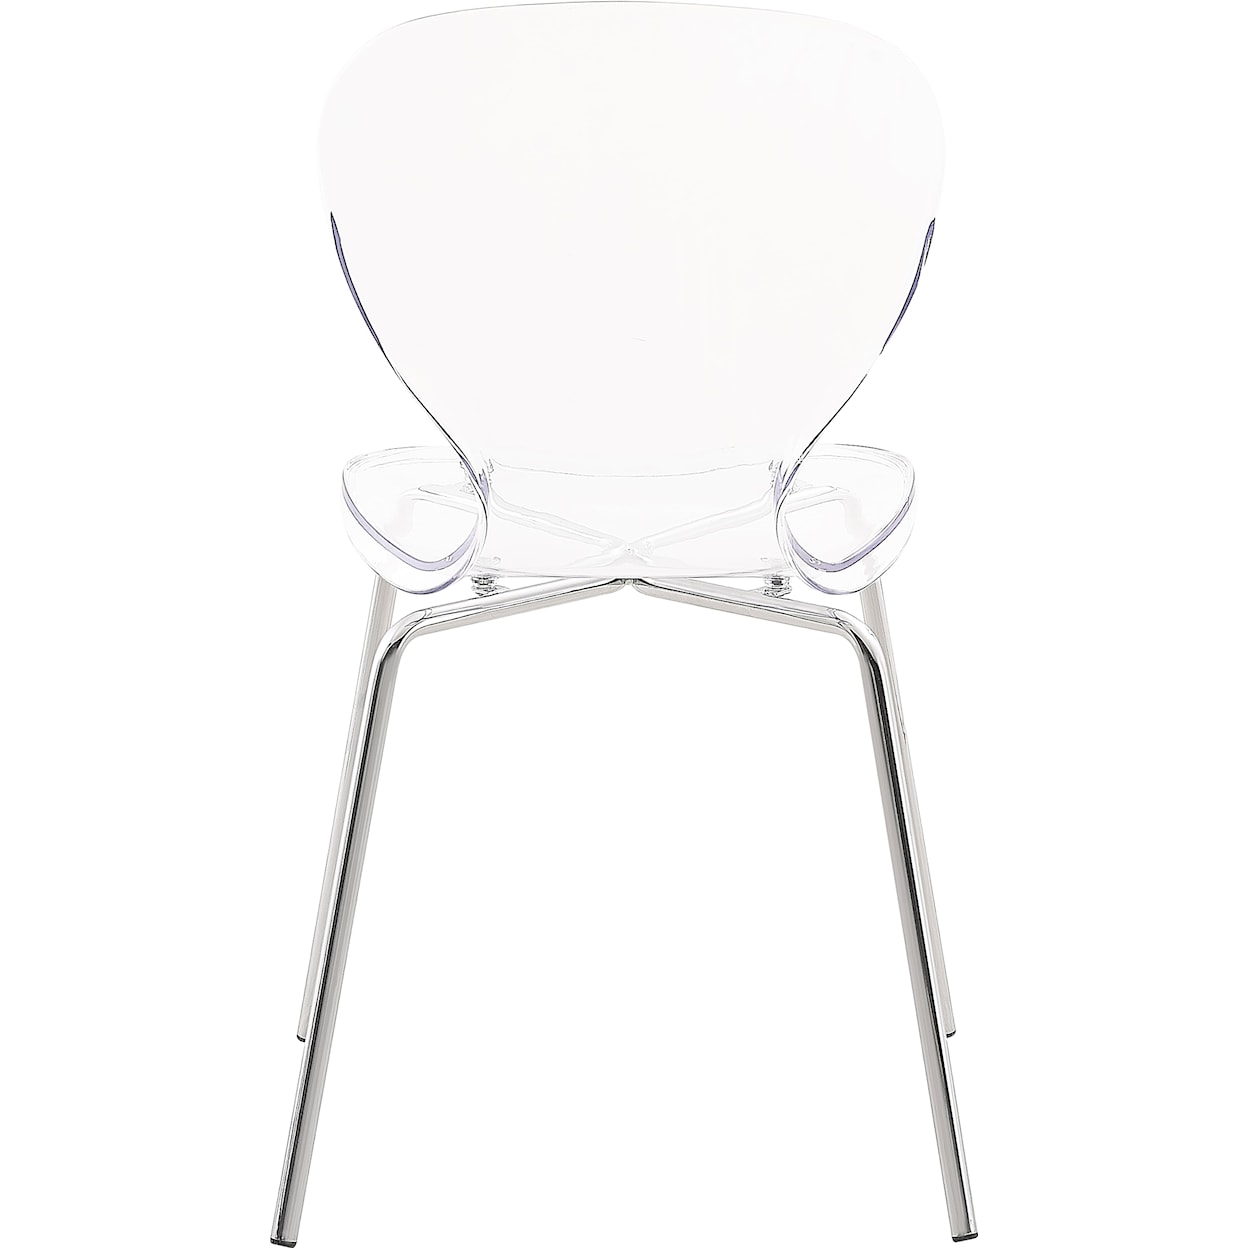 Meridian Furniture Clarion Dining Chair